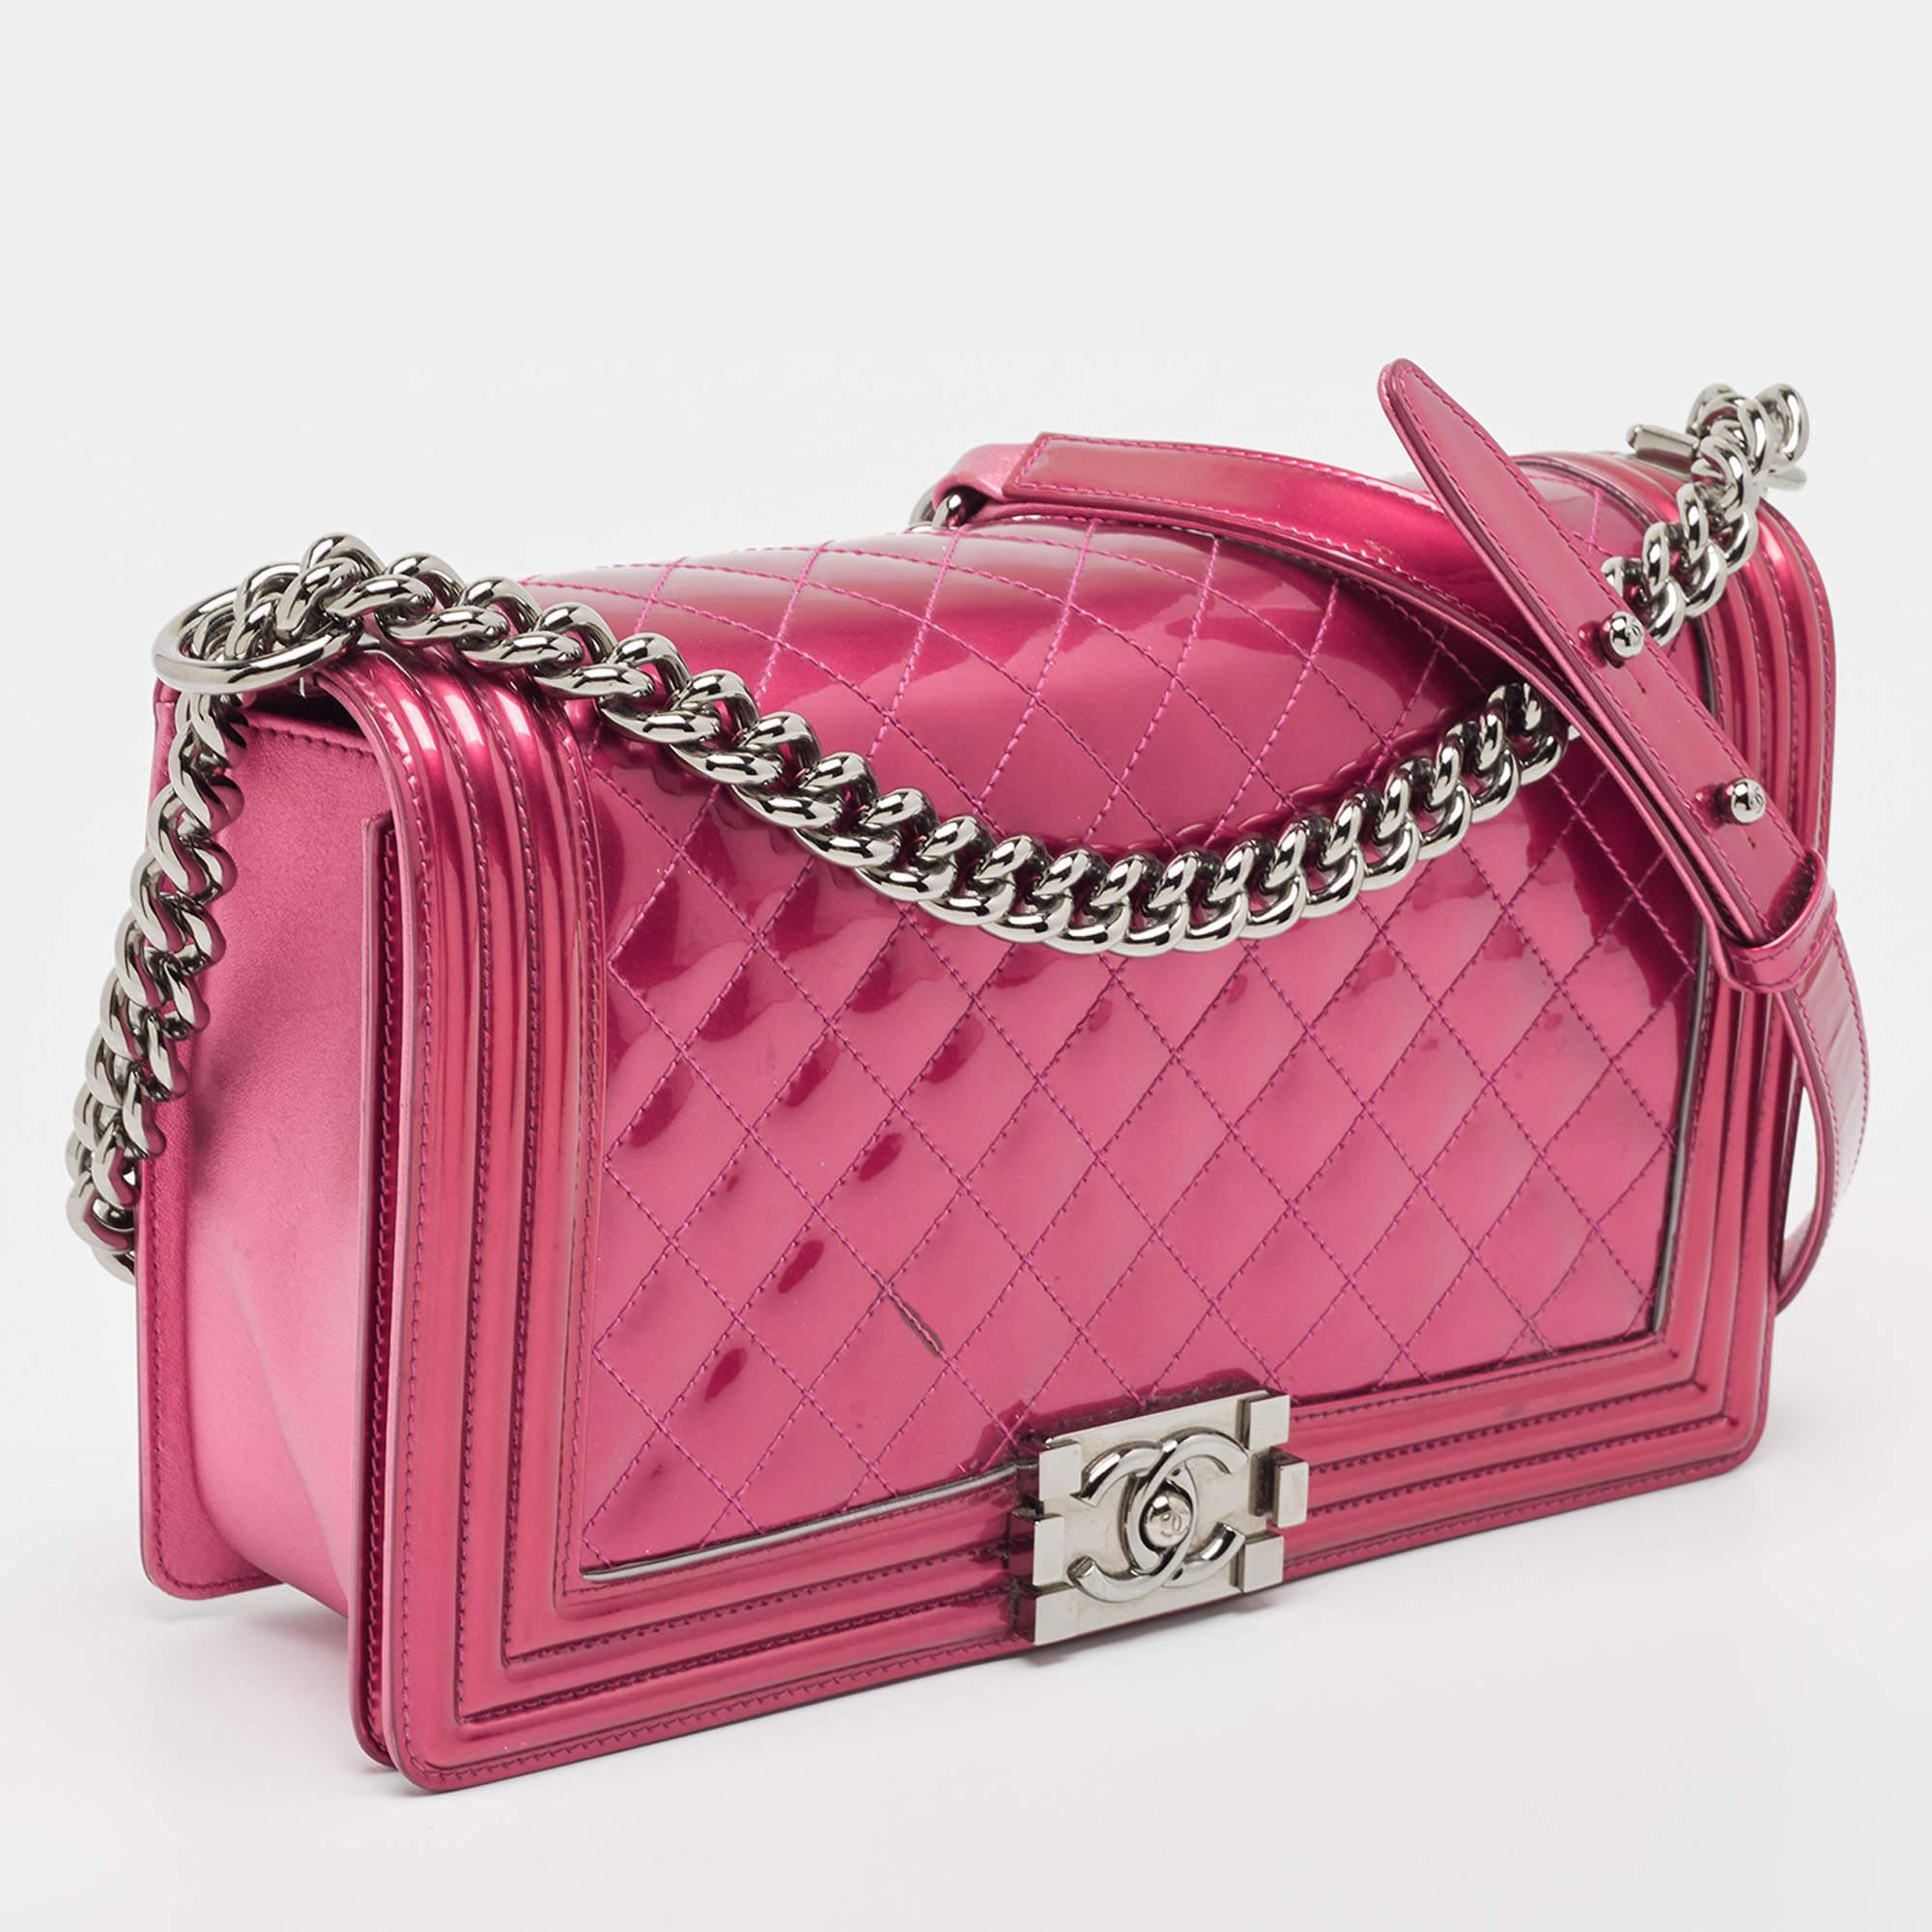 Chanel Pink Quilted Patent Leather New Medium Boy Flap Bag In Fair Condition For Sale In Dubai, Al Qouz 2